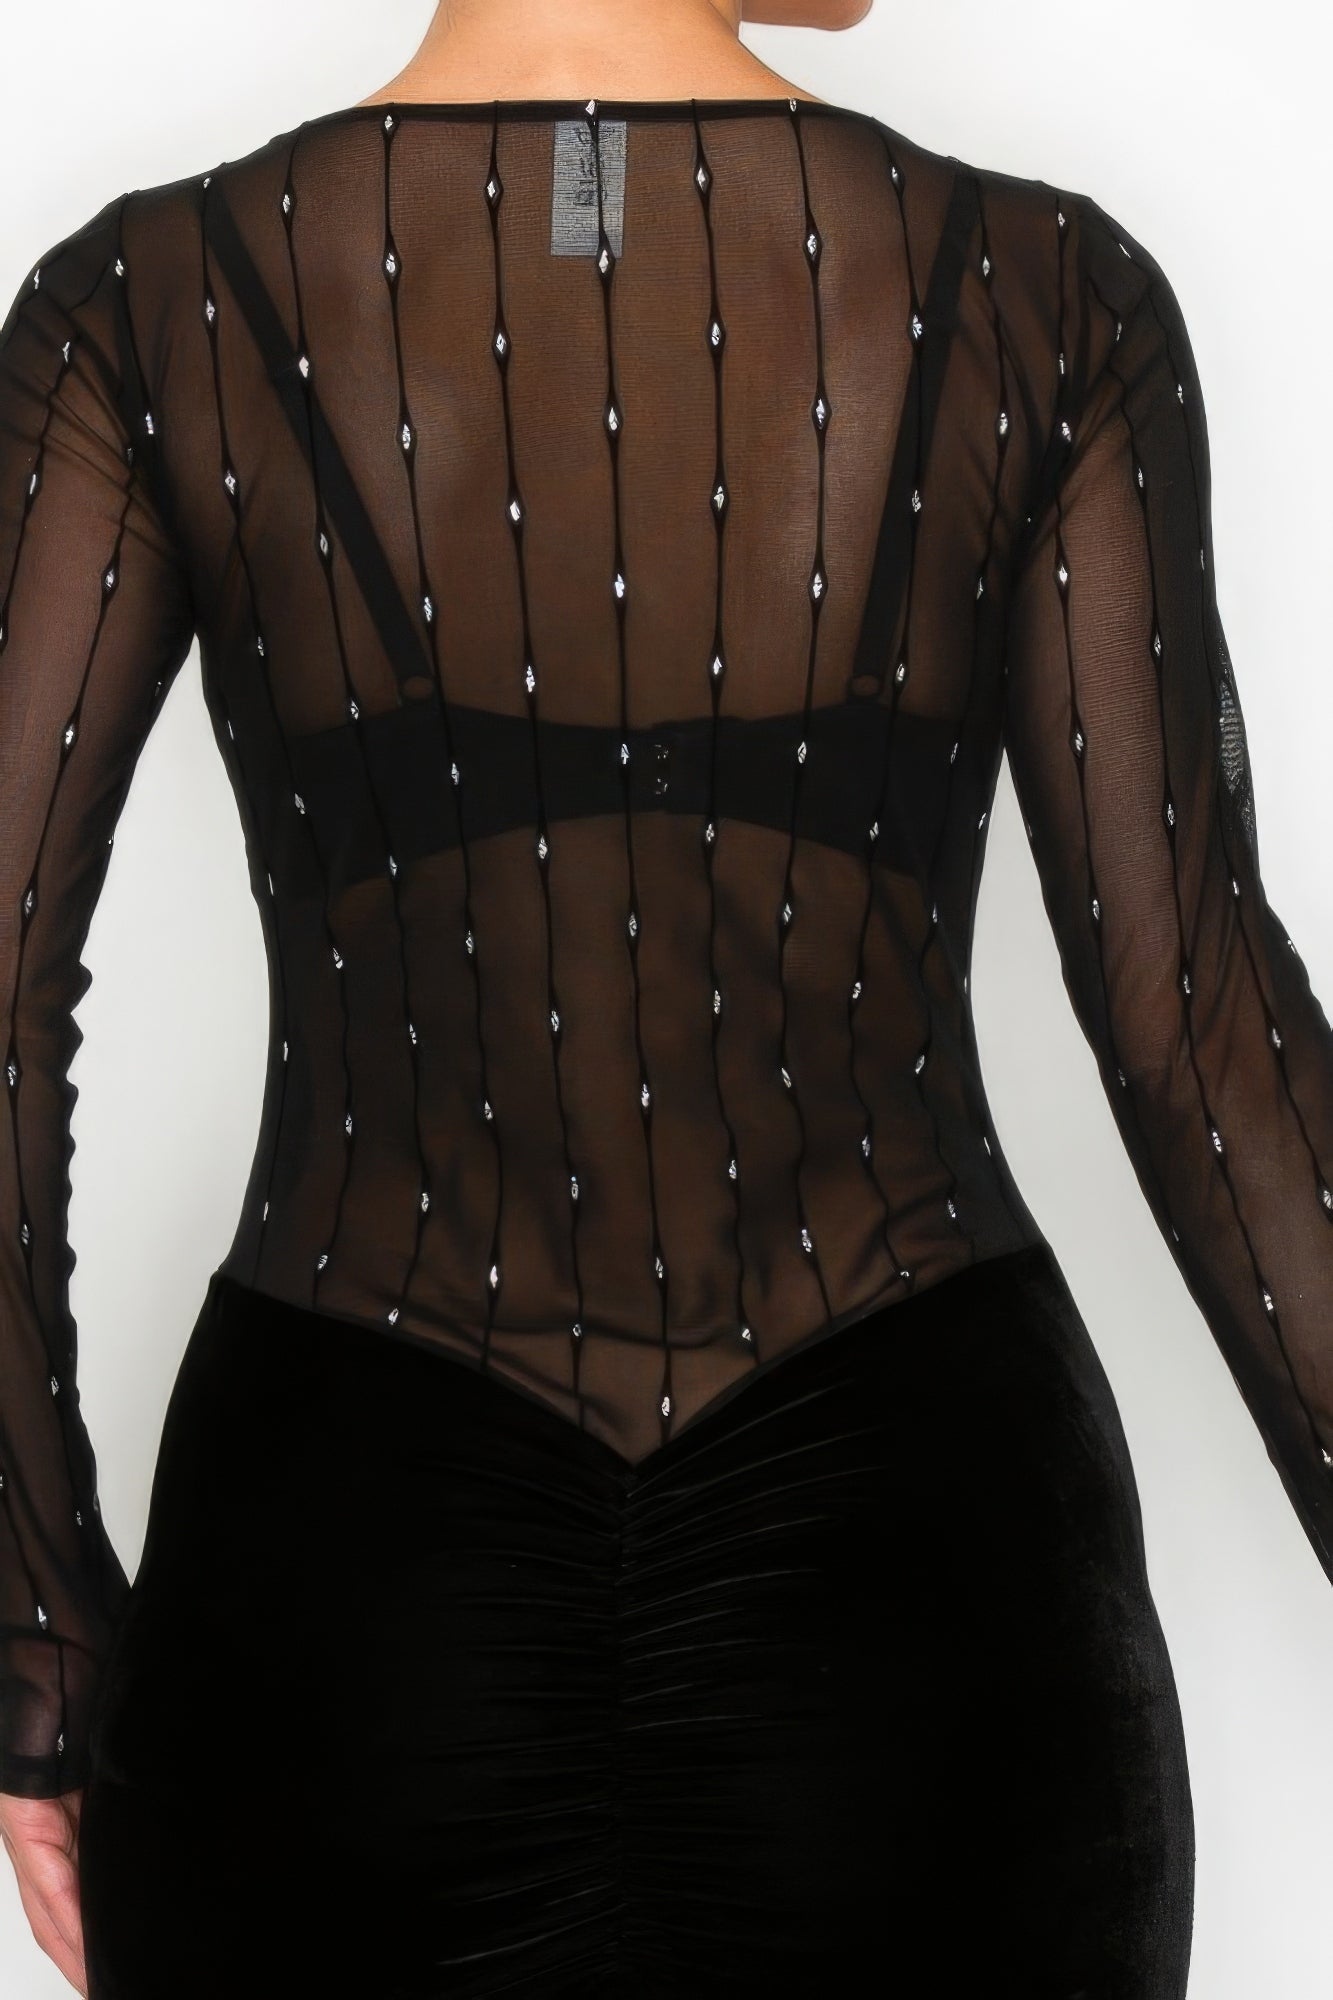 Sheer Bodice with Sparkling Embellishments